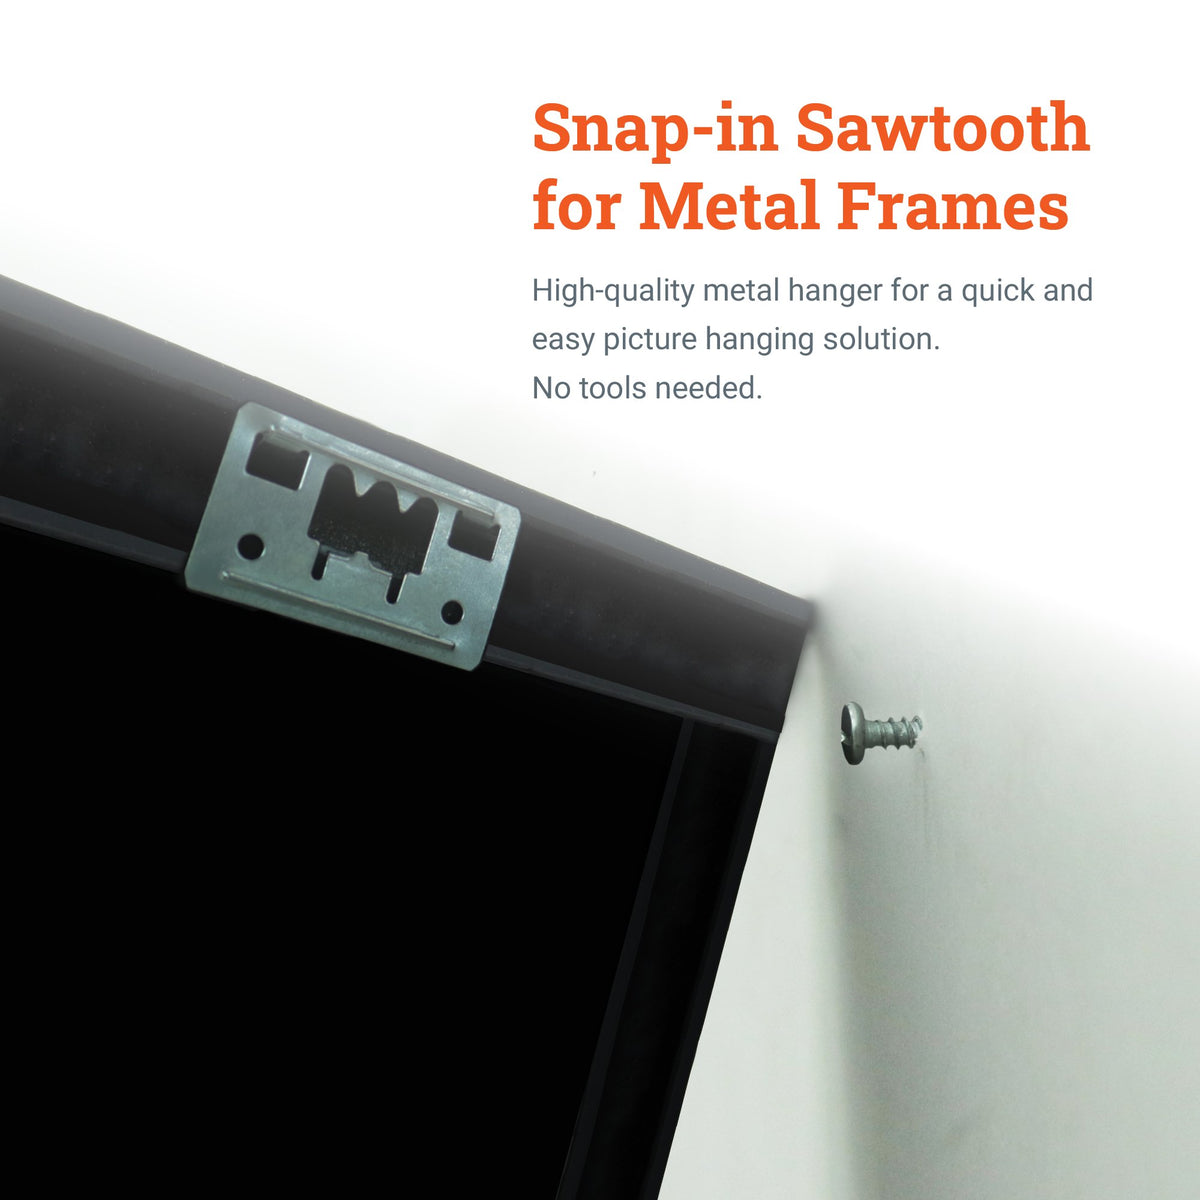 Snap-in Sawtooth for Metal Frames - HWR-07X - Picture Hang Solutions